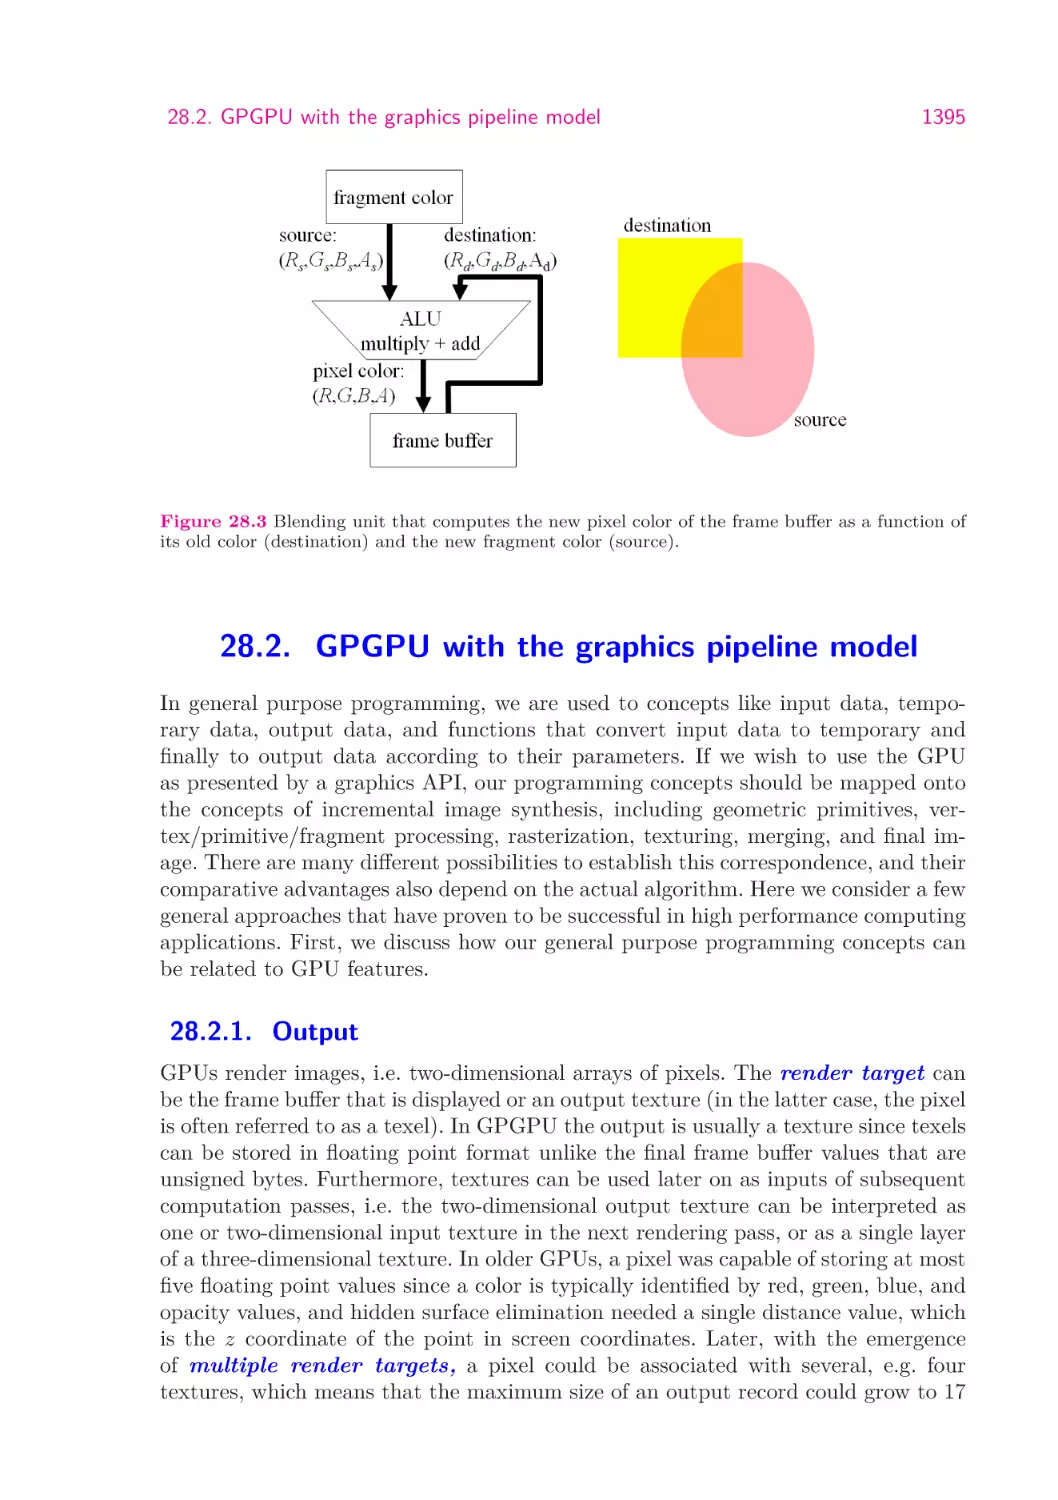 28.2.  GPGPU with the graphics pipeline model
28.2.1.  Output